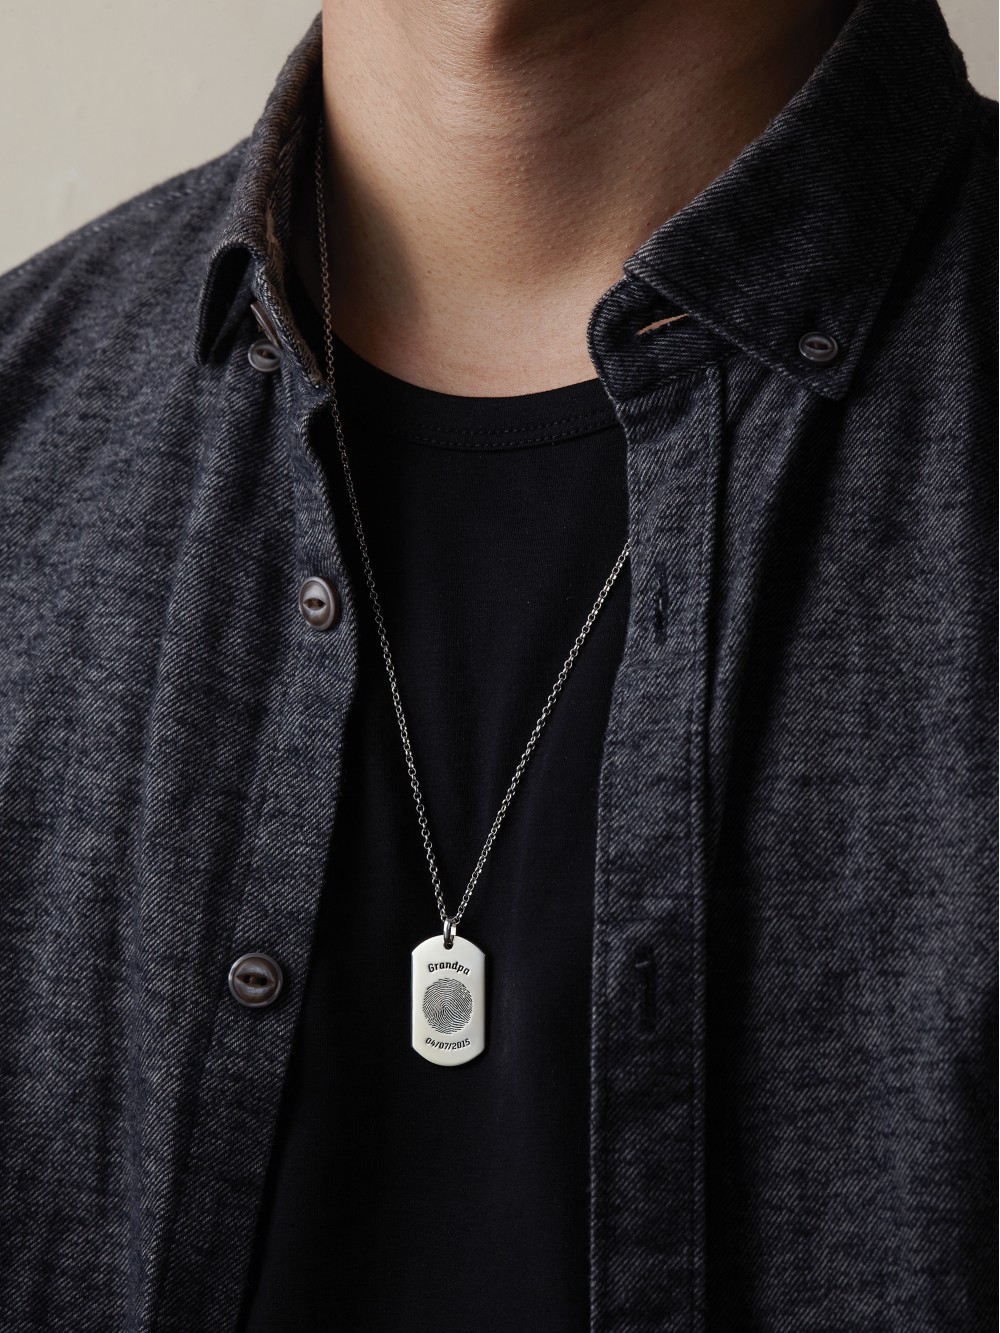 Engraved Dog Tag Necklace with Thumbprint